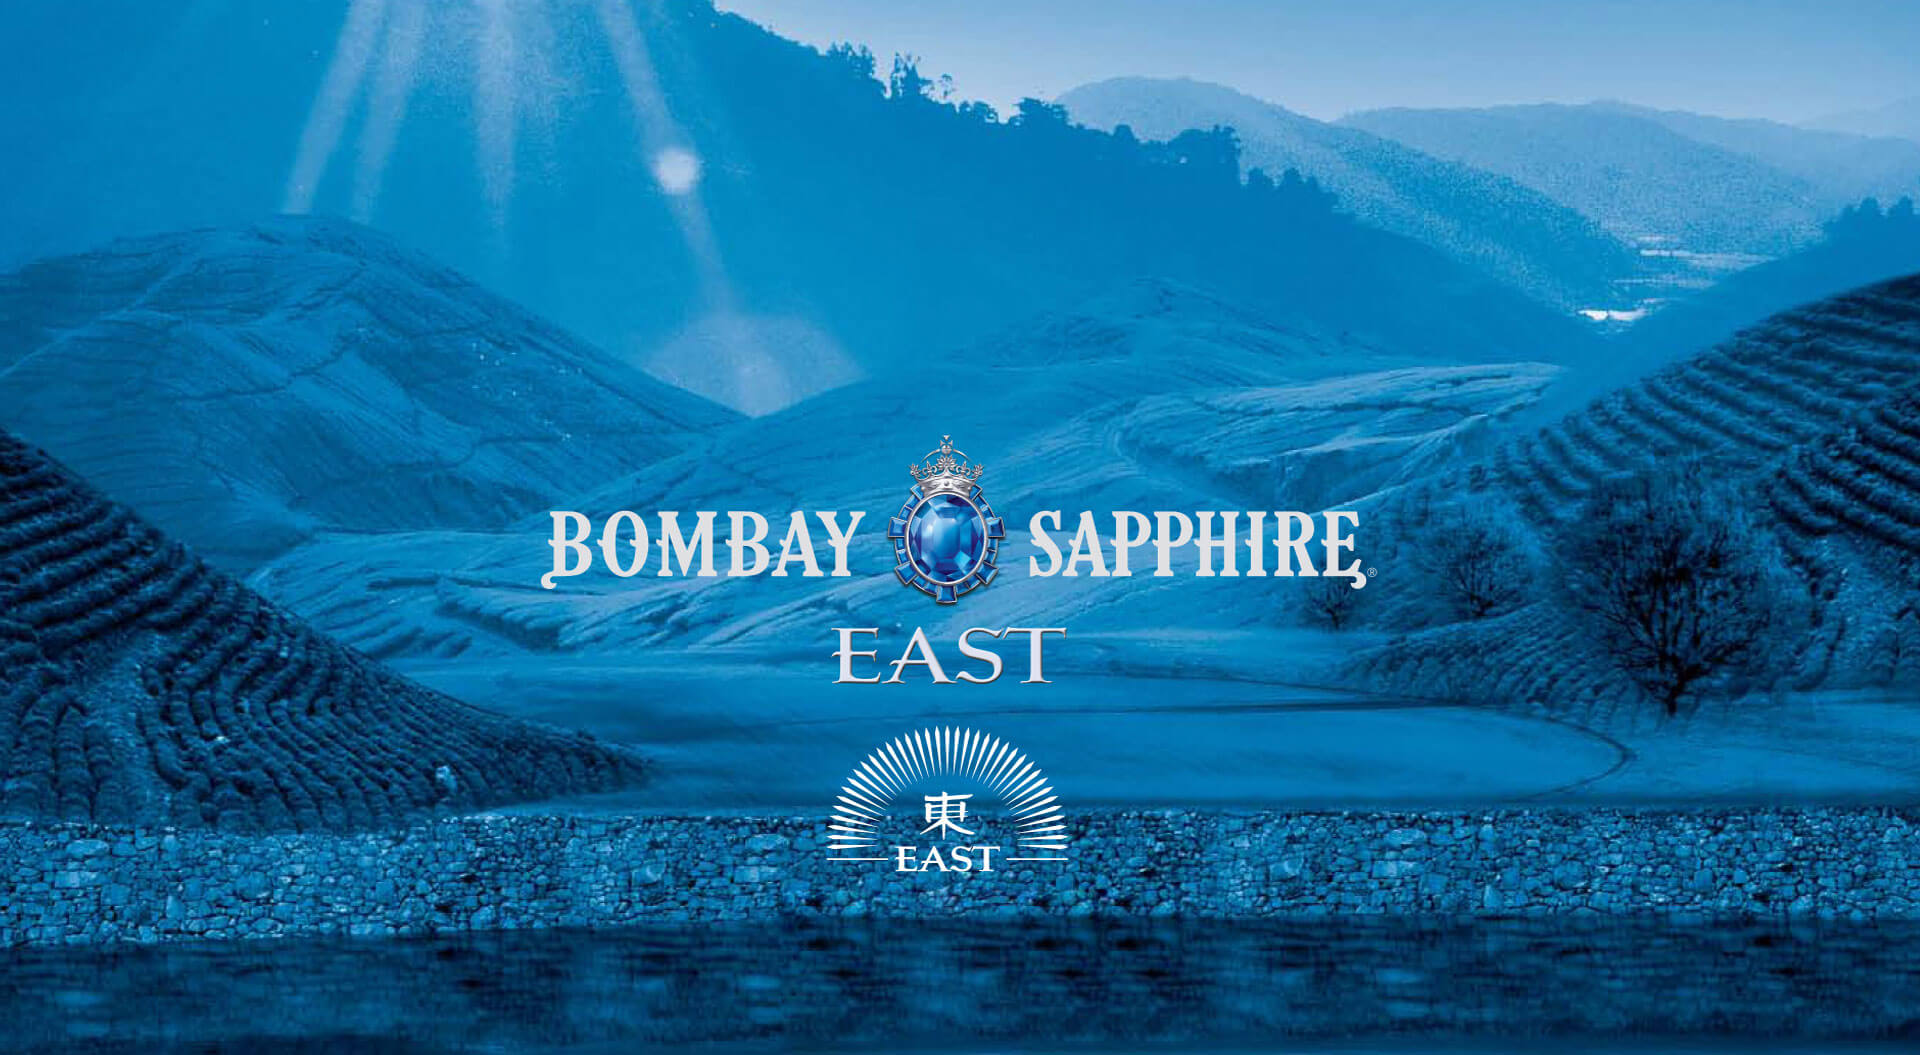 Bombay Sapphire East Spirits industry promotion campaigns travel retail airports, duty-free alcohol marketing, Bacardi Global Travel Retail, 